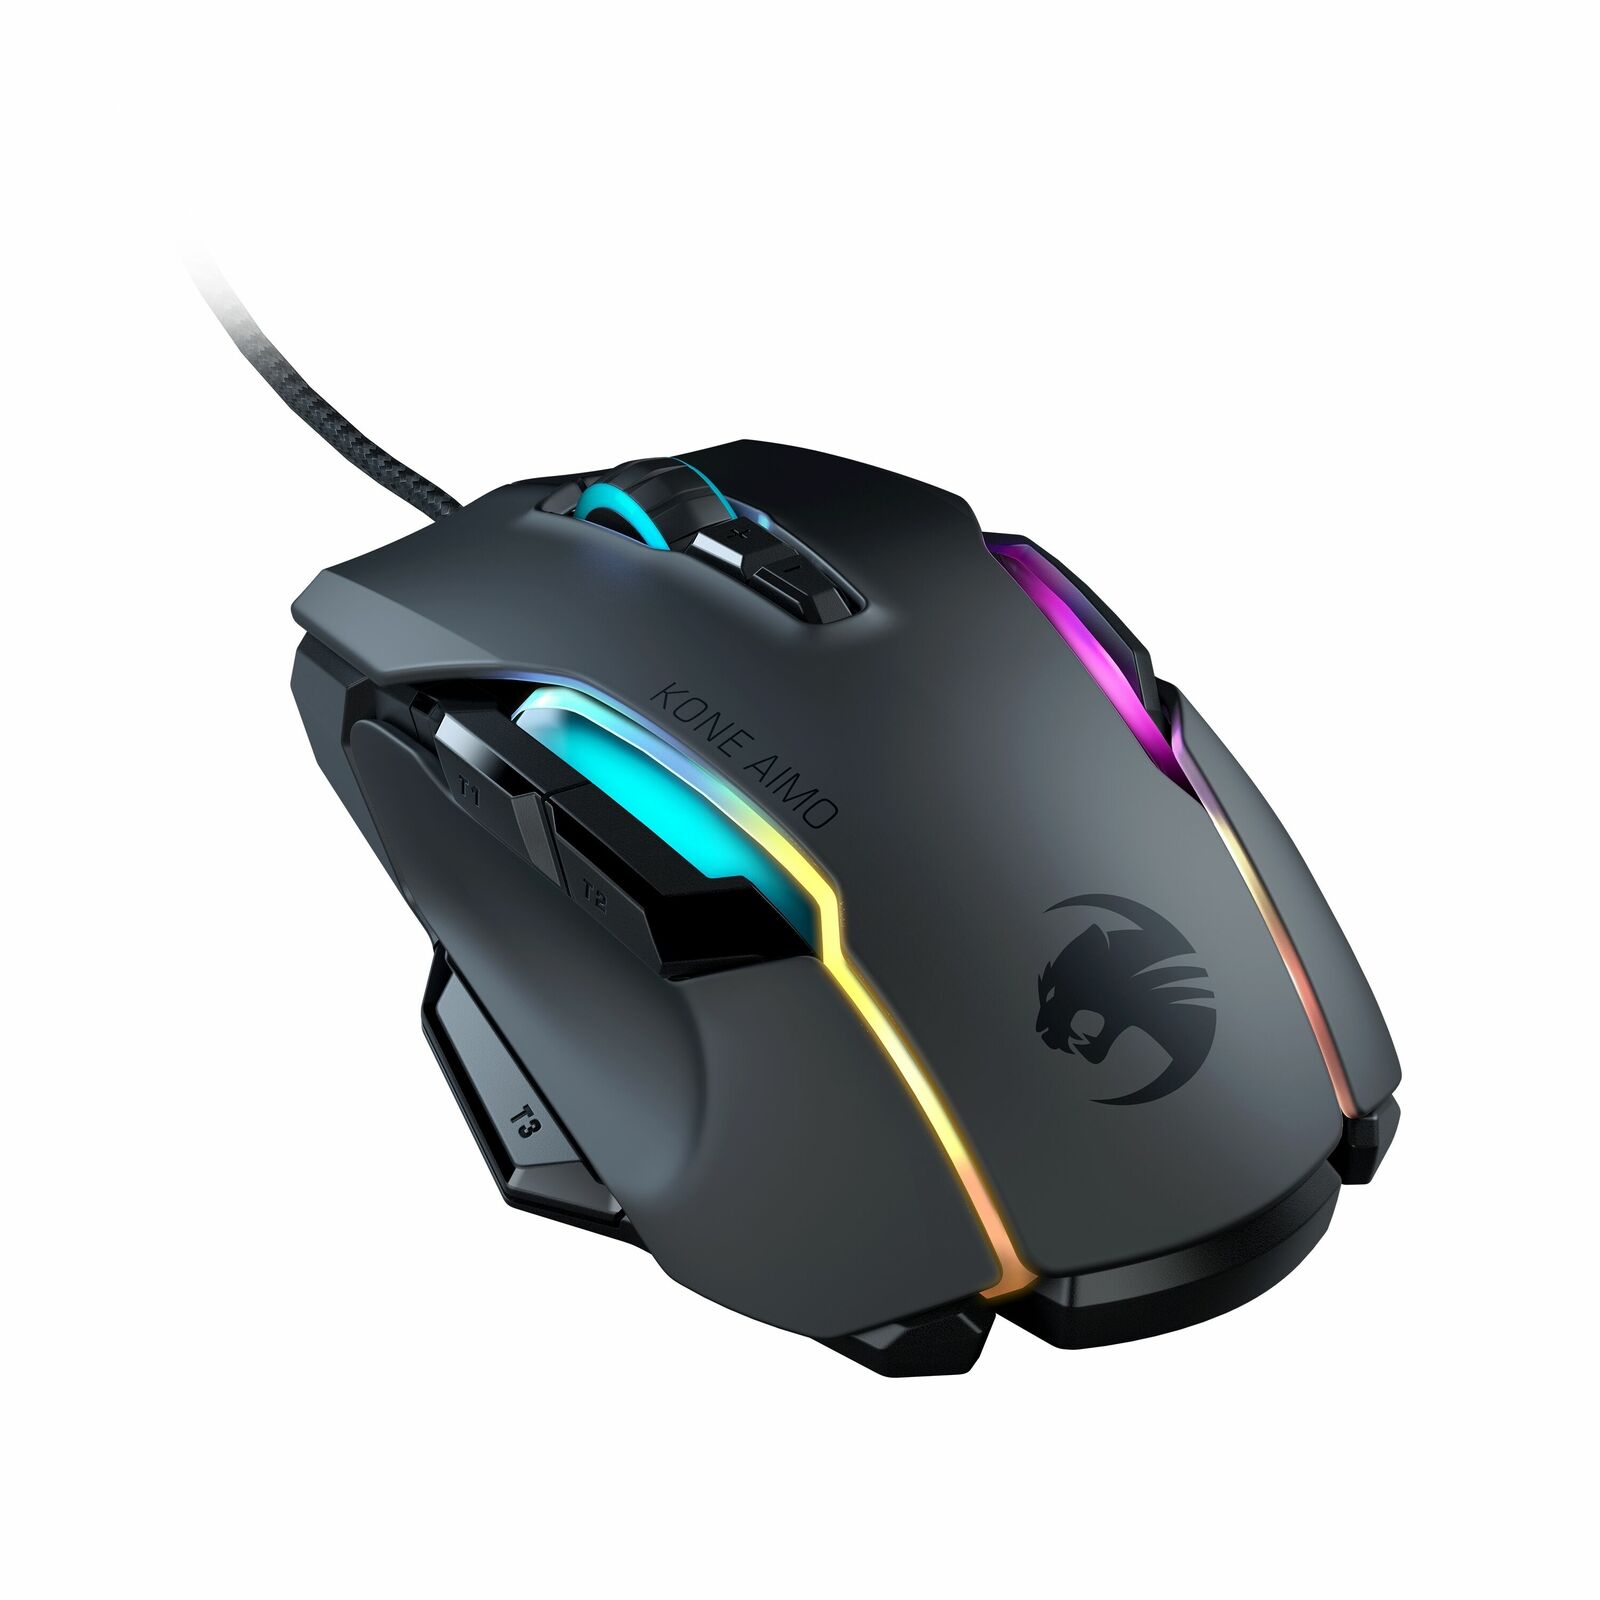 ROCCAT ROC-11-820-BK Kone AIMO Remastered RGBA Smart Customization Gaming Mouse - Black - image 4 of 6